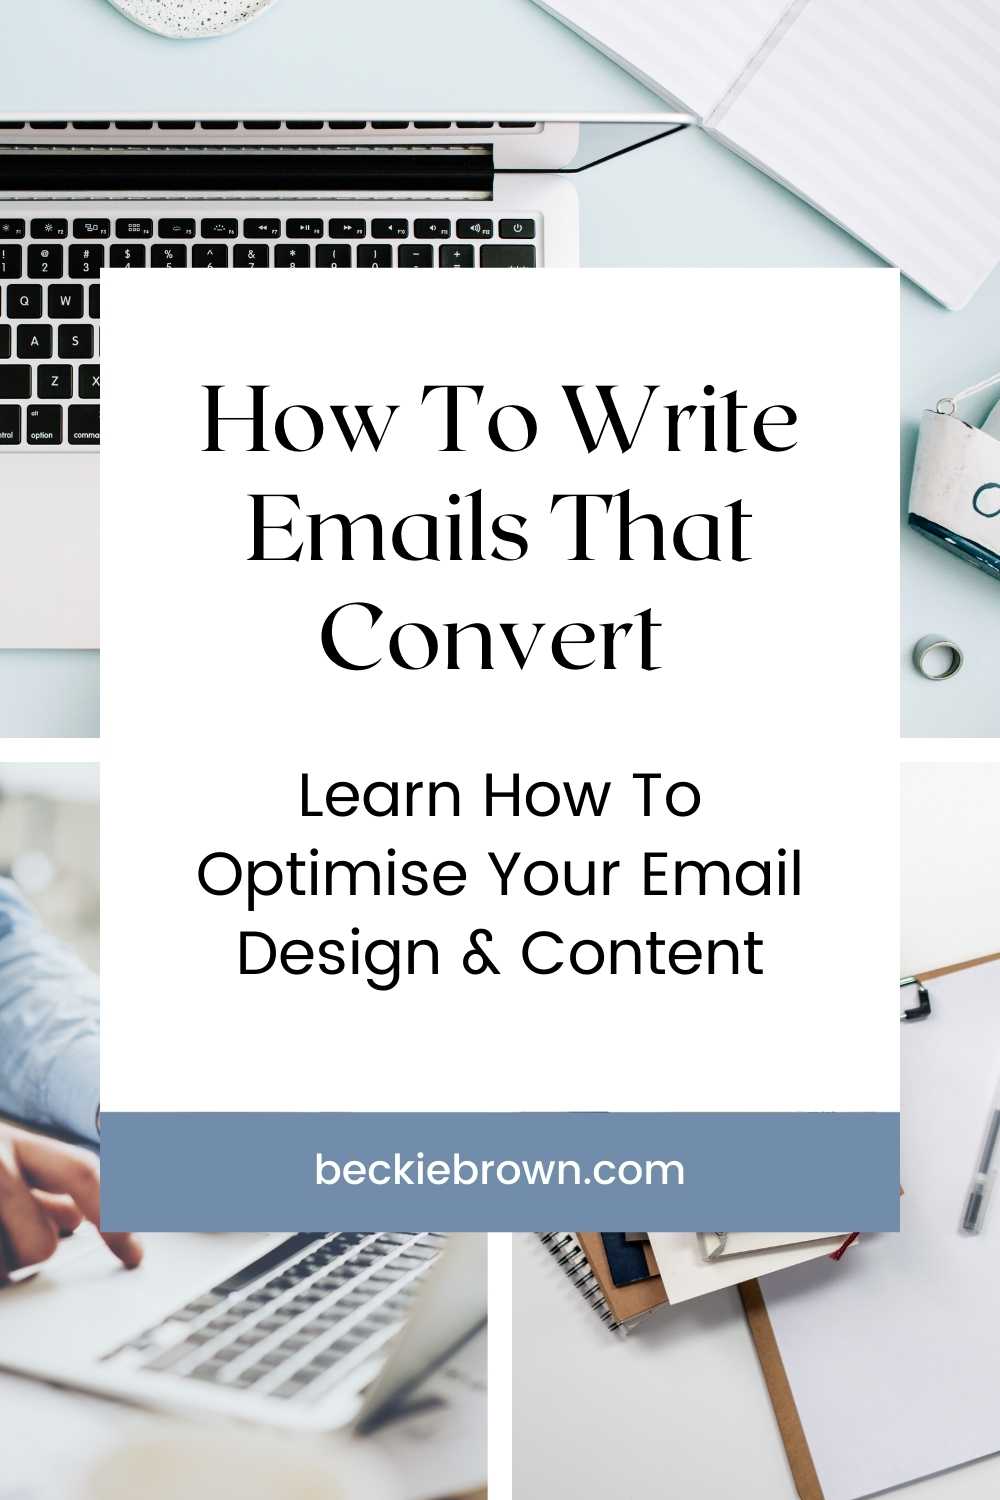 Pin Image: How to write emails that convert!